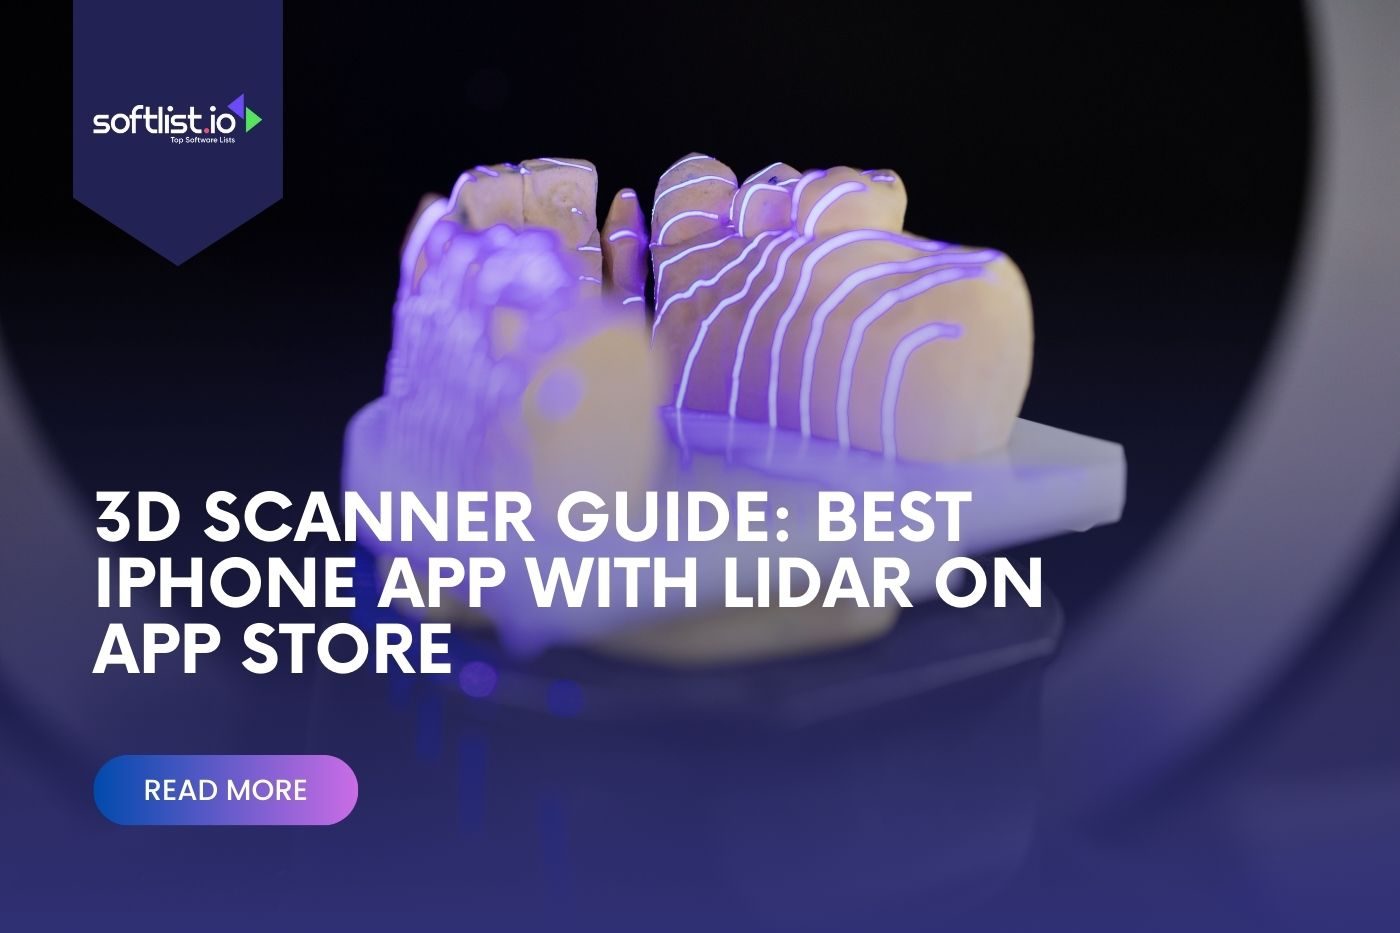 Guide to the Best 3D Scanner Apps for iPhone: Use LiDAR for Top Results